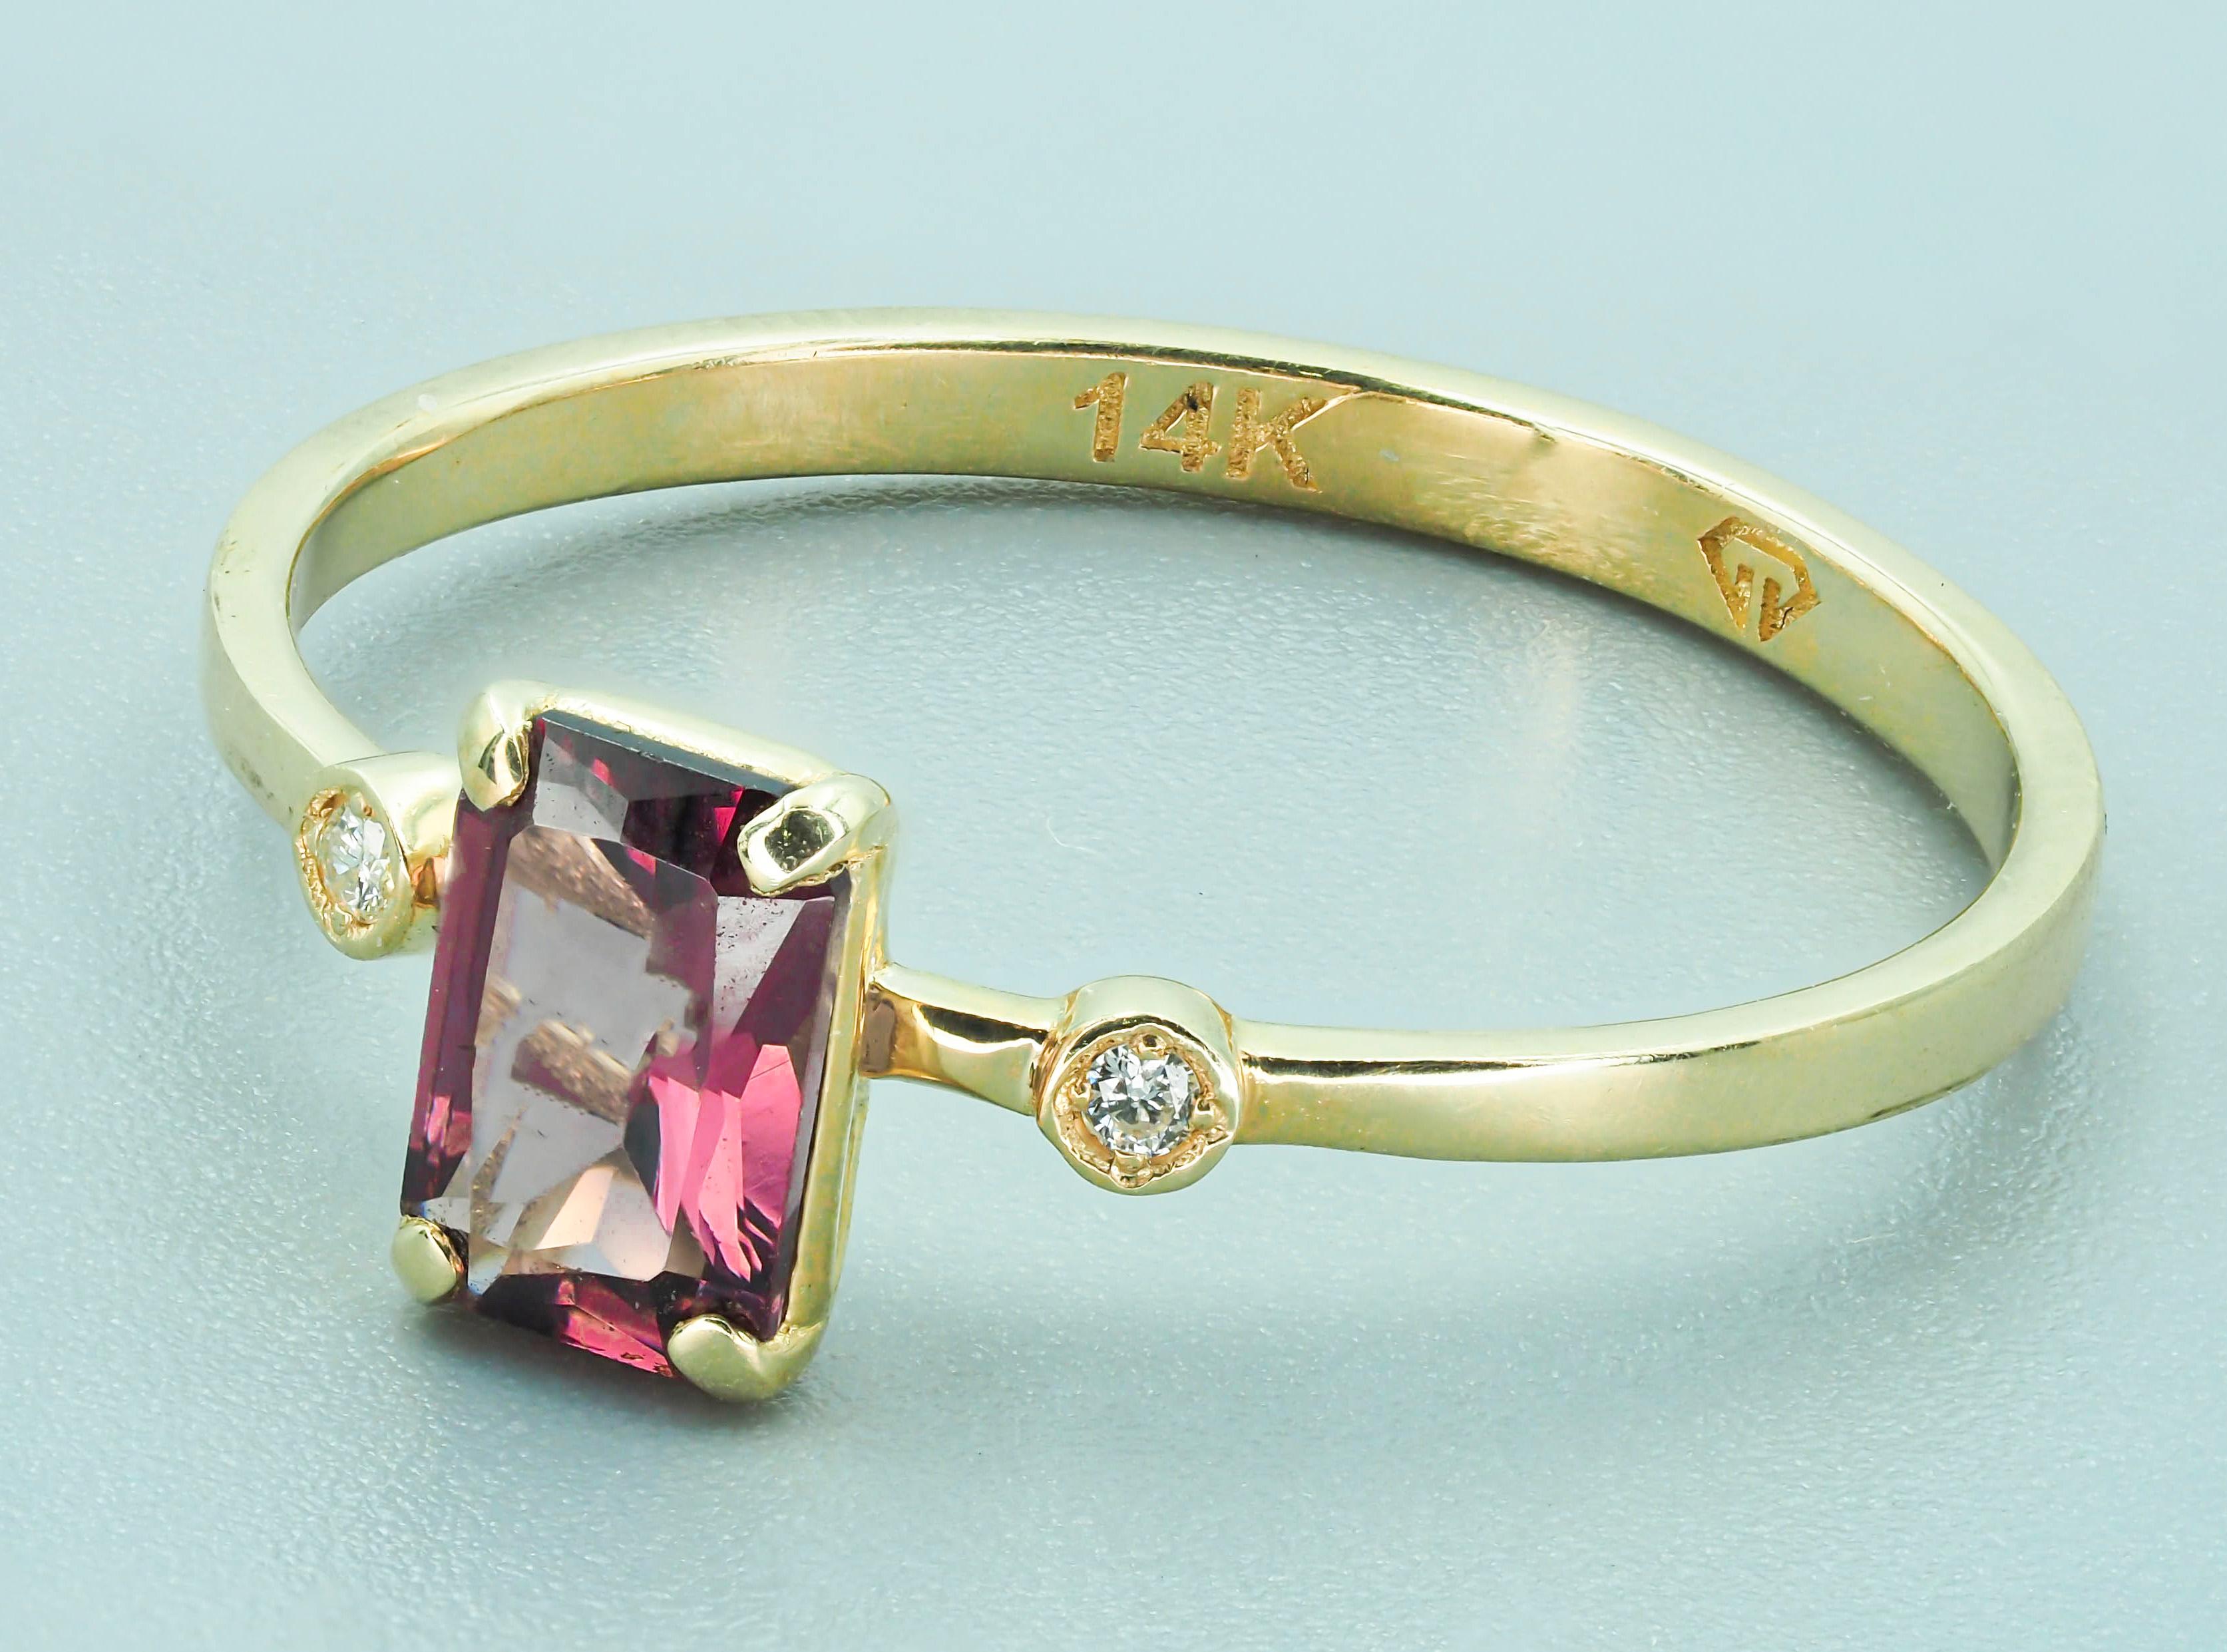 For Sale:  14 karat Gold Ring with Spinel and Diamonds 7